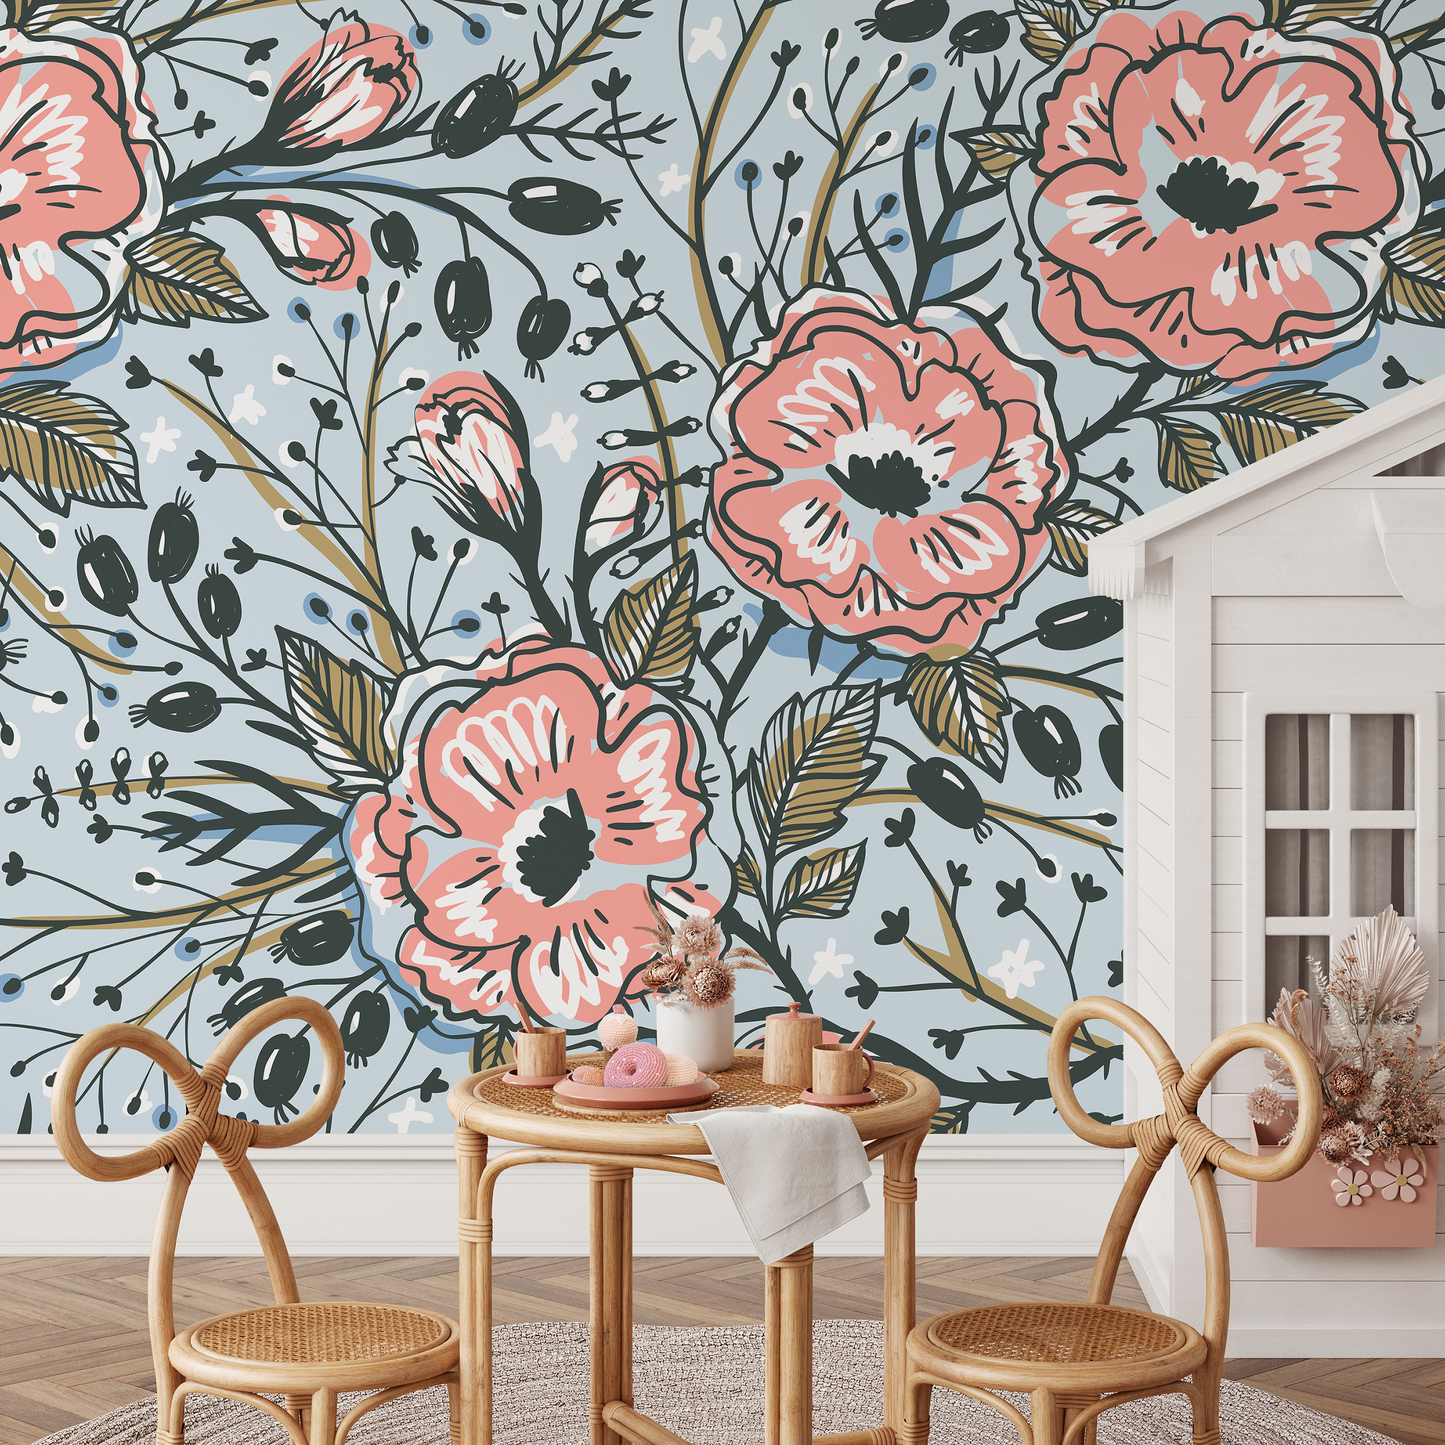 Removable Wallpaper Peel and Stick Wallpaper Wall Paper Wall Mural - Vintage Floral Wallpaper  - A418